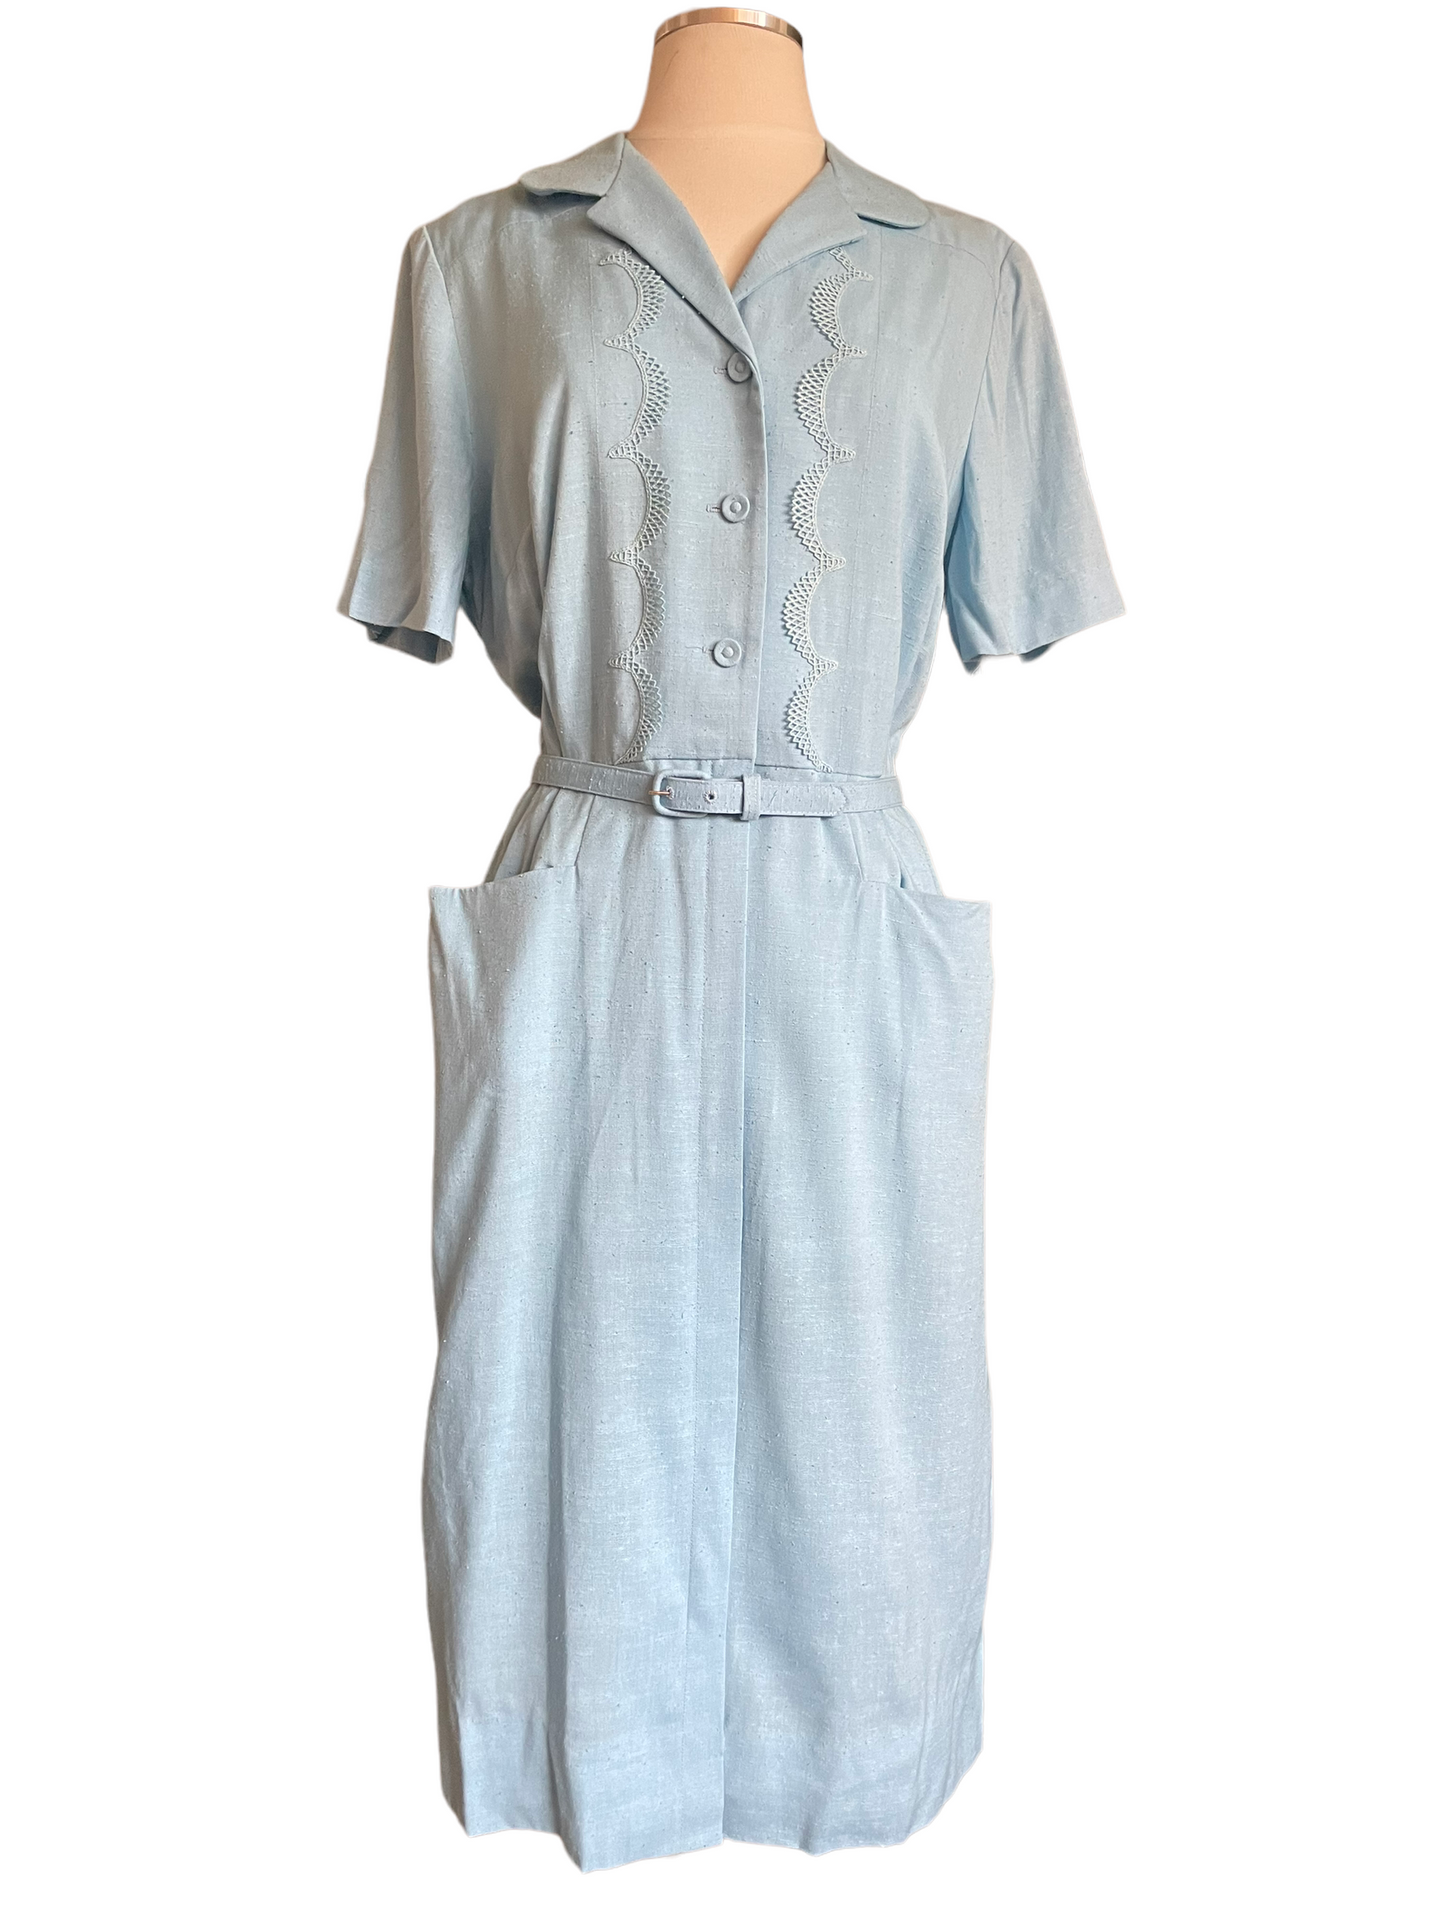  Vintage 1950s Deadstock Lordleigh Light Blue Silk and Rayon Dress SZ M|  Barn Owl Vintage | Seattle Vintage Dresses front view.